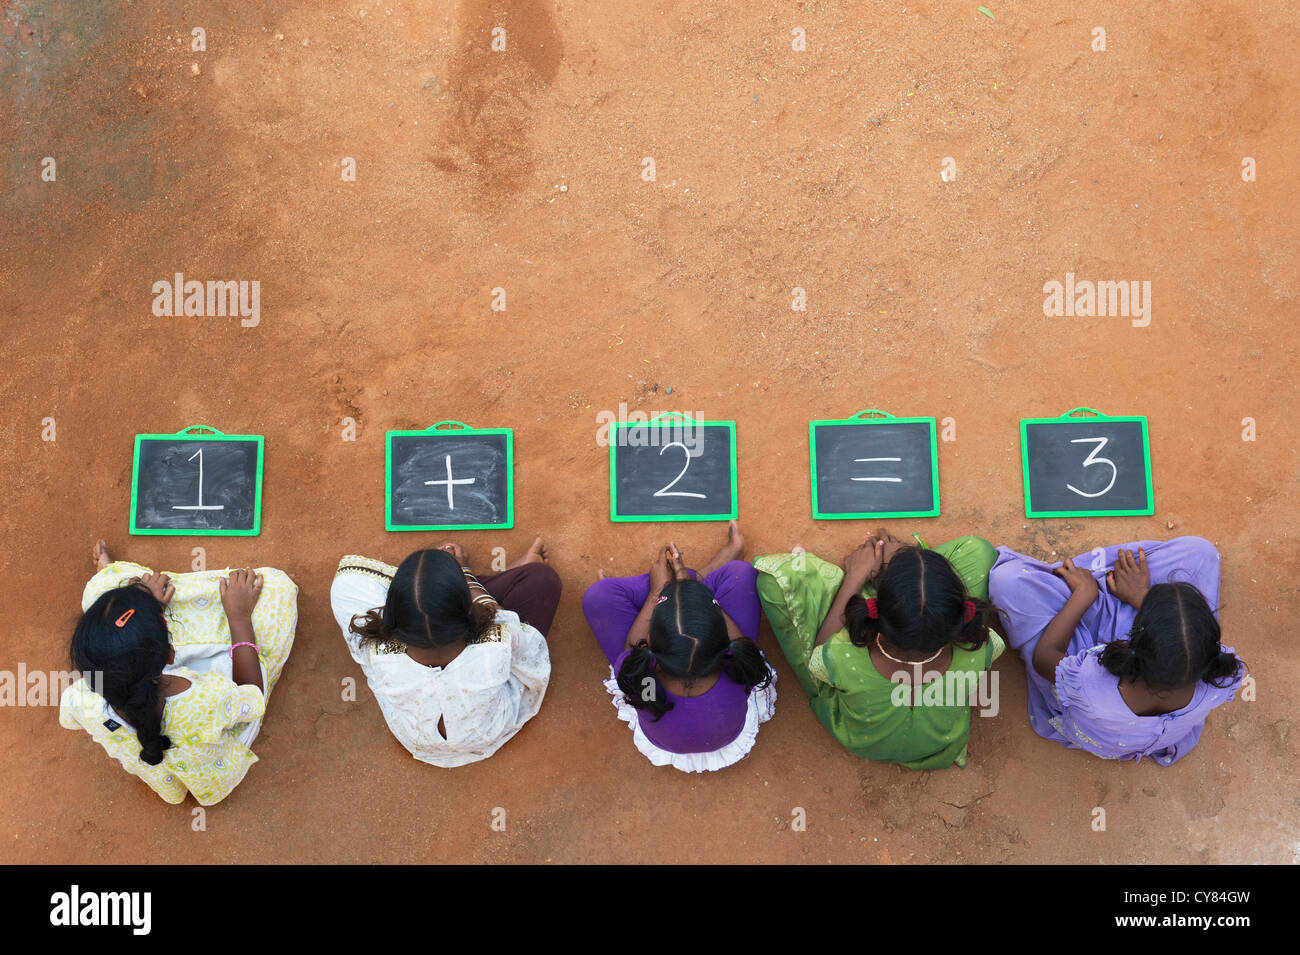 Five Indian village girls with 1 + 2 = 3 written on a chalkboard in a rural indian village. Andhra Pradesh, India. Copy space. Stock Photo